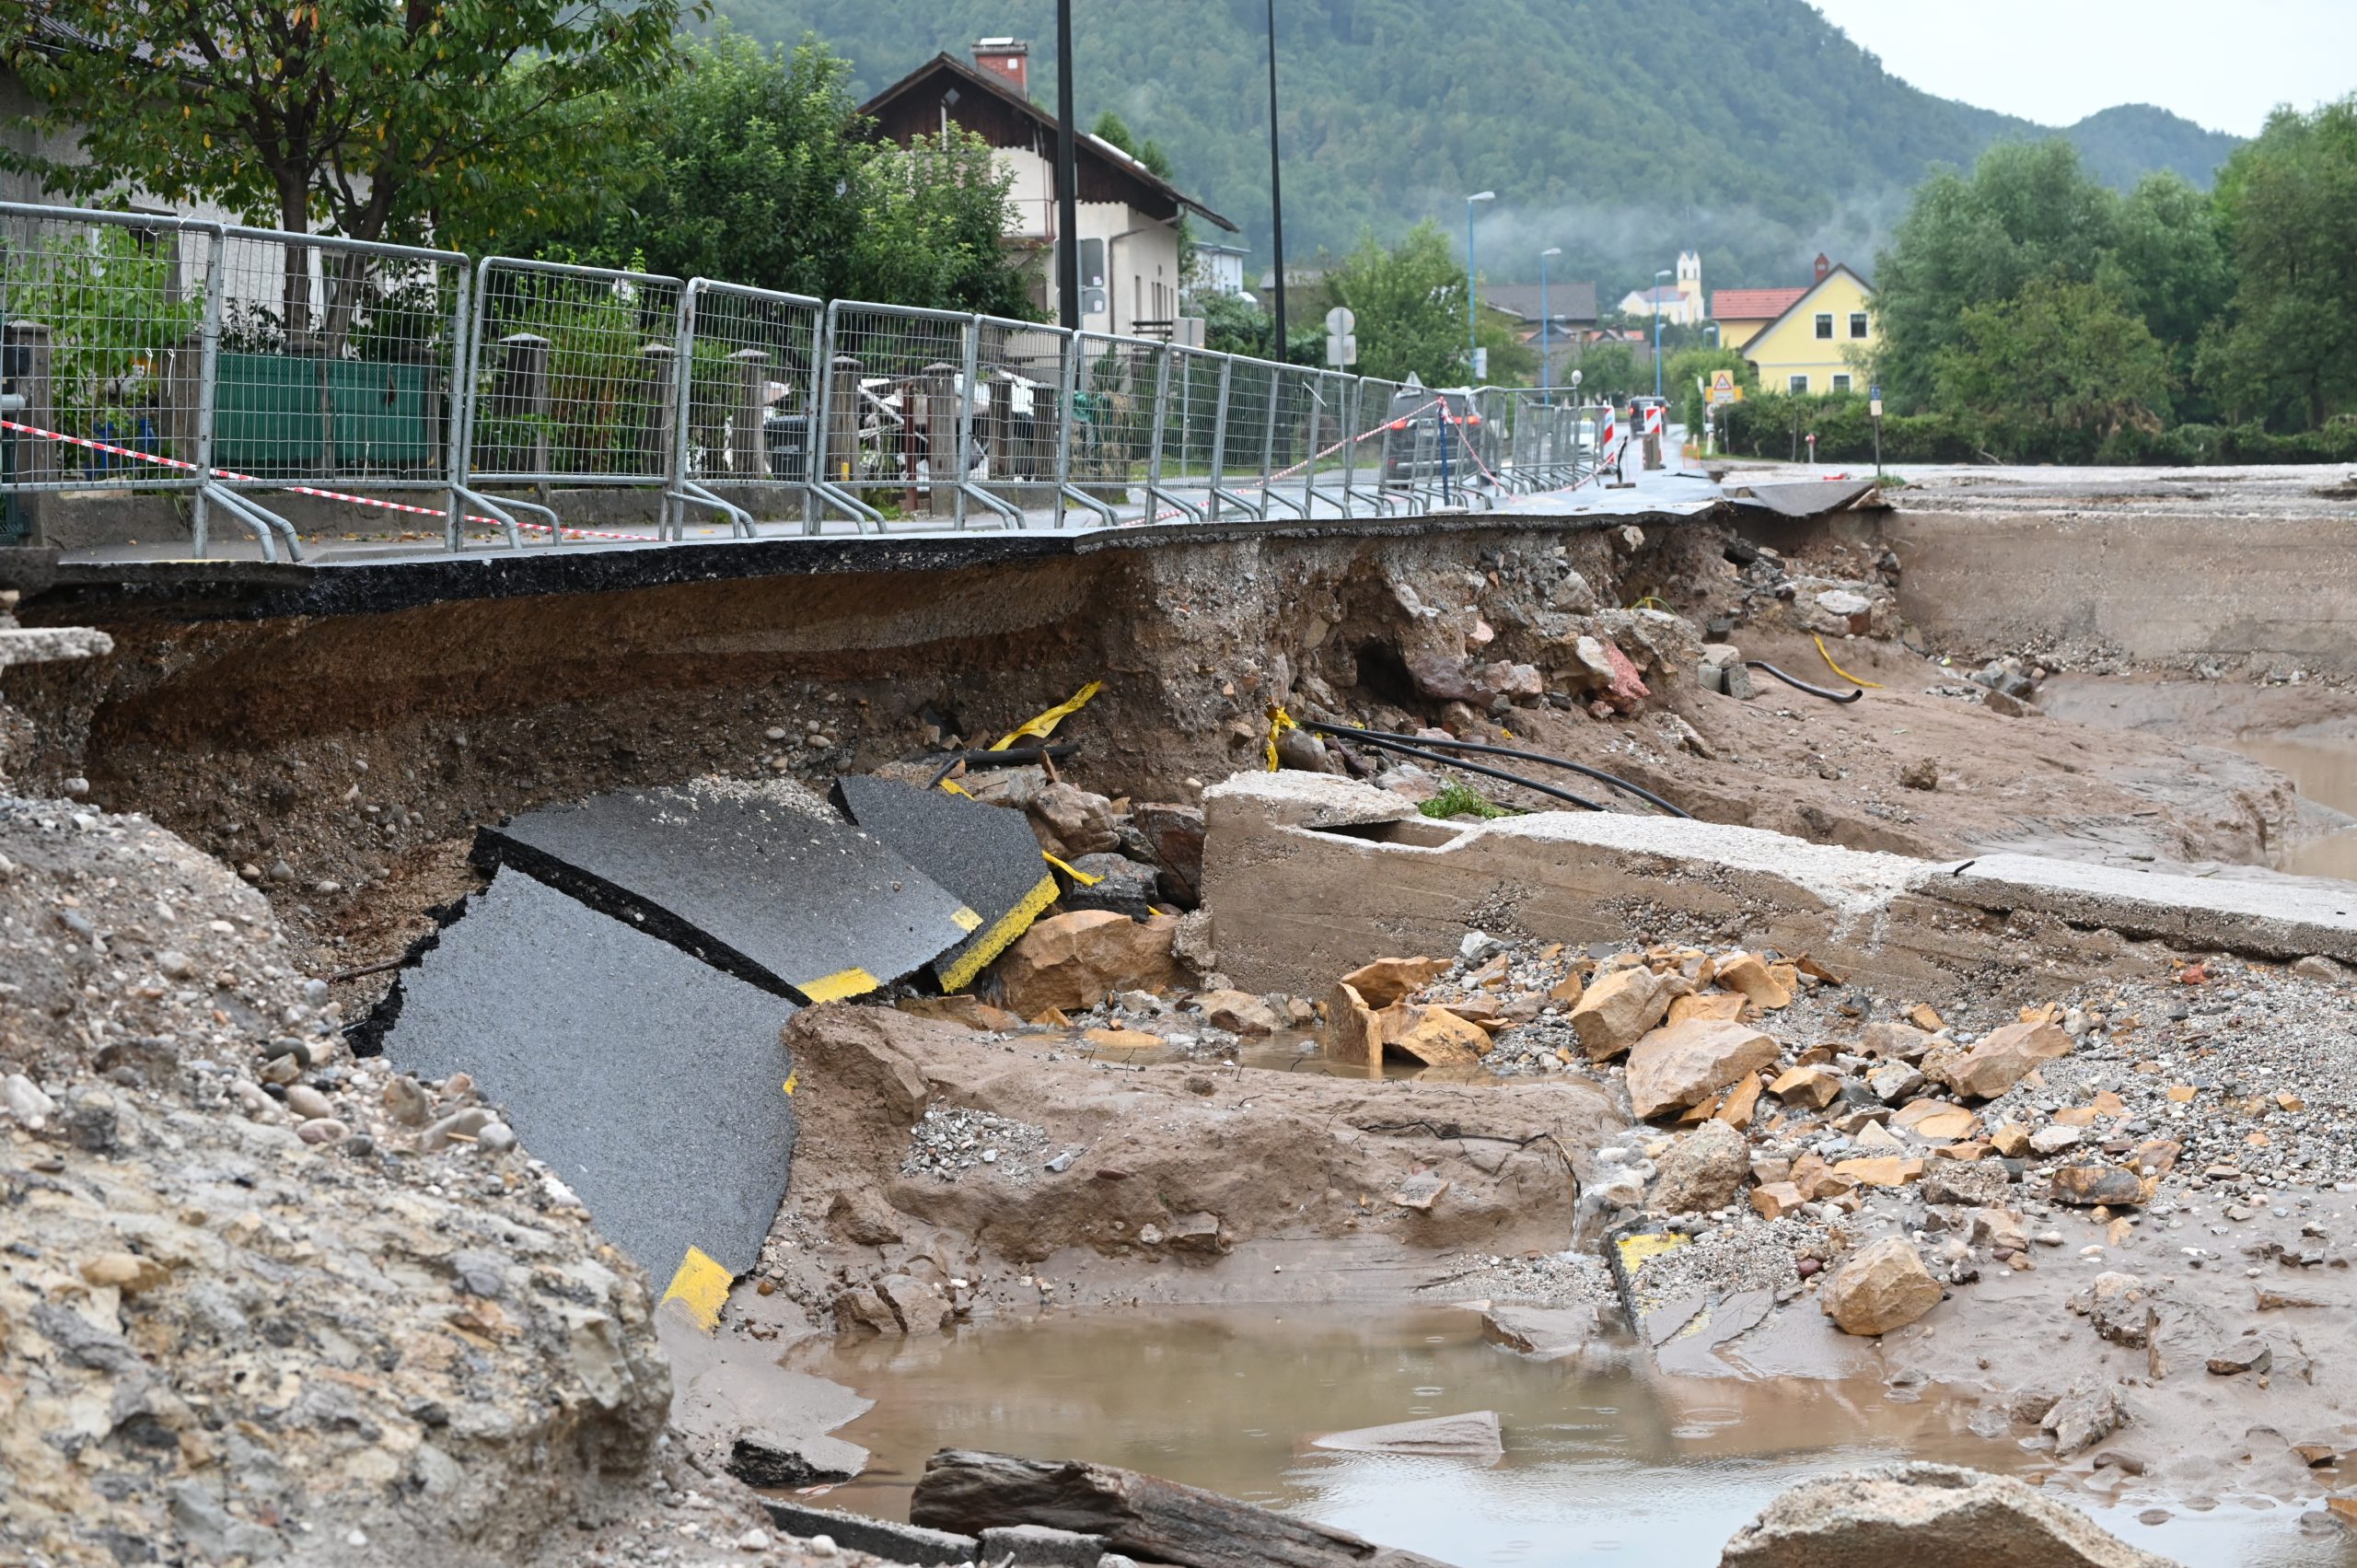 epa10787118 A view on a collapsed bridge near Skofja Loka town in Slovenia, 06 August 2023. Slovenia has been hit by flash floods following heavy torrential rains on 04 August. The country has faced the biggest natural disaster in its history‘ said Slovenian Prime Minister Robert Golob on 05 August. Slovenian Government estimated the damage of roads, energy infrastructure, as well as hundreds of homes is likely to exceed 500 million euros.  EPA/ZIGA ZIVULOVIC JR